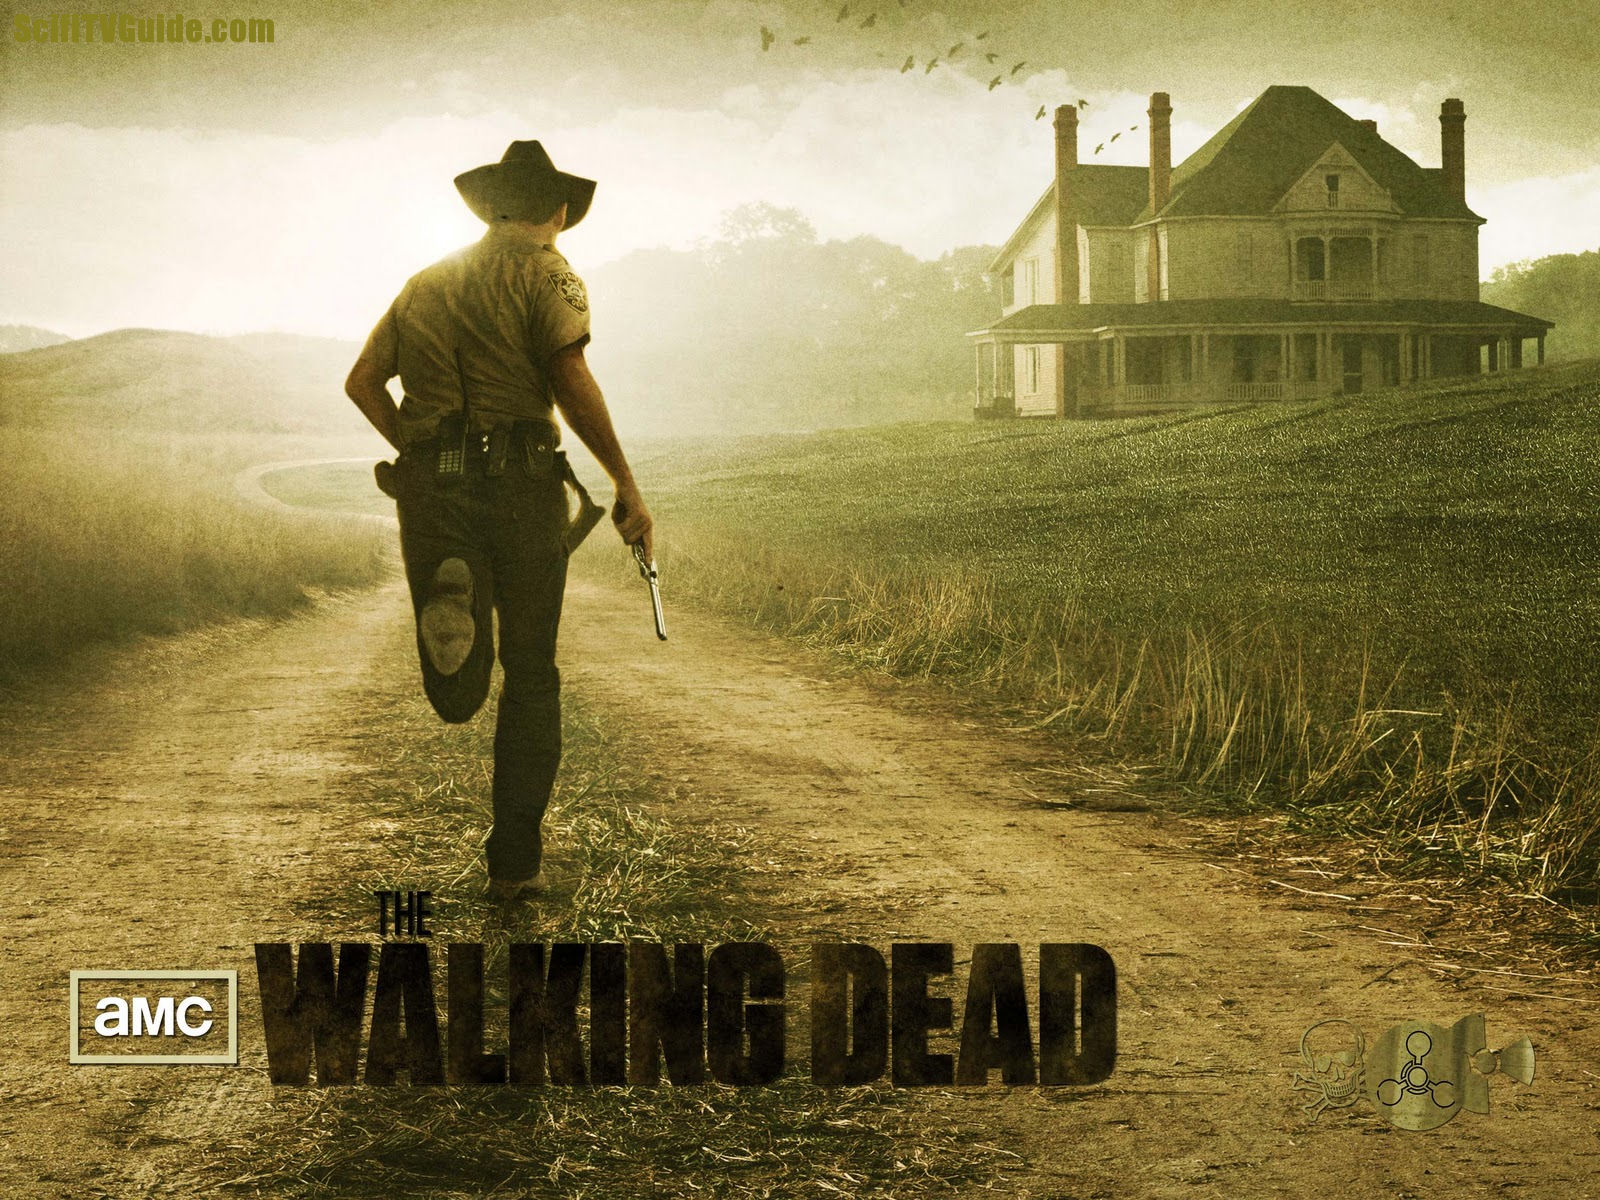 HD The Walking Dead Wallpaper Pictures To